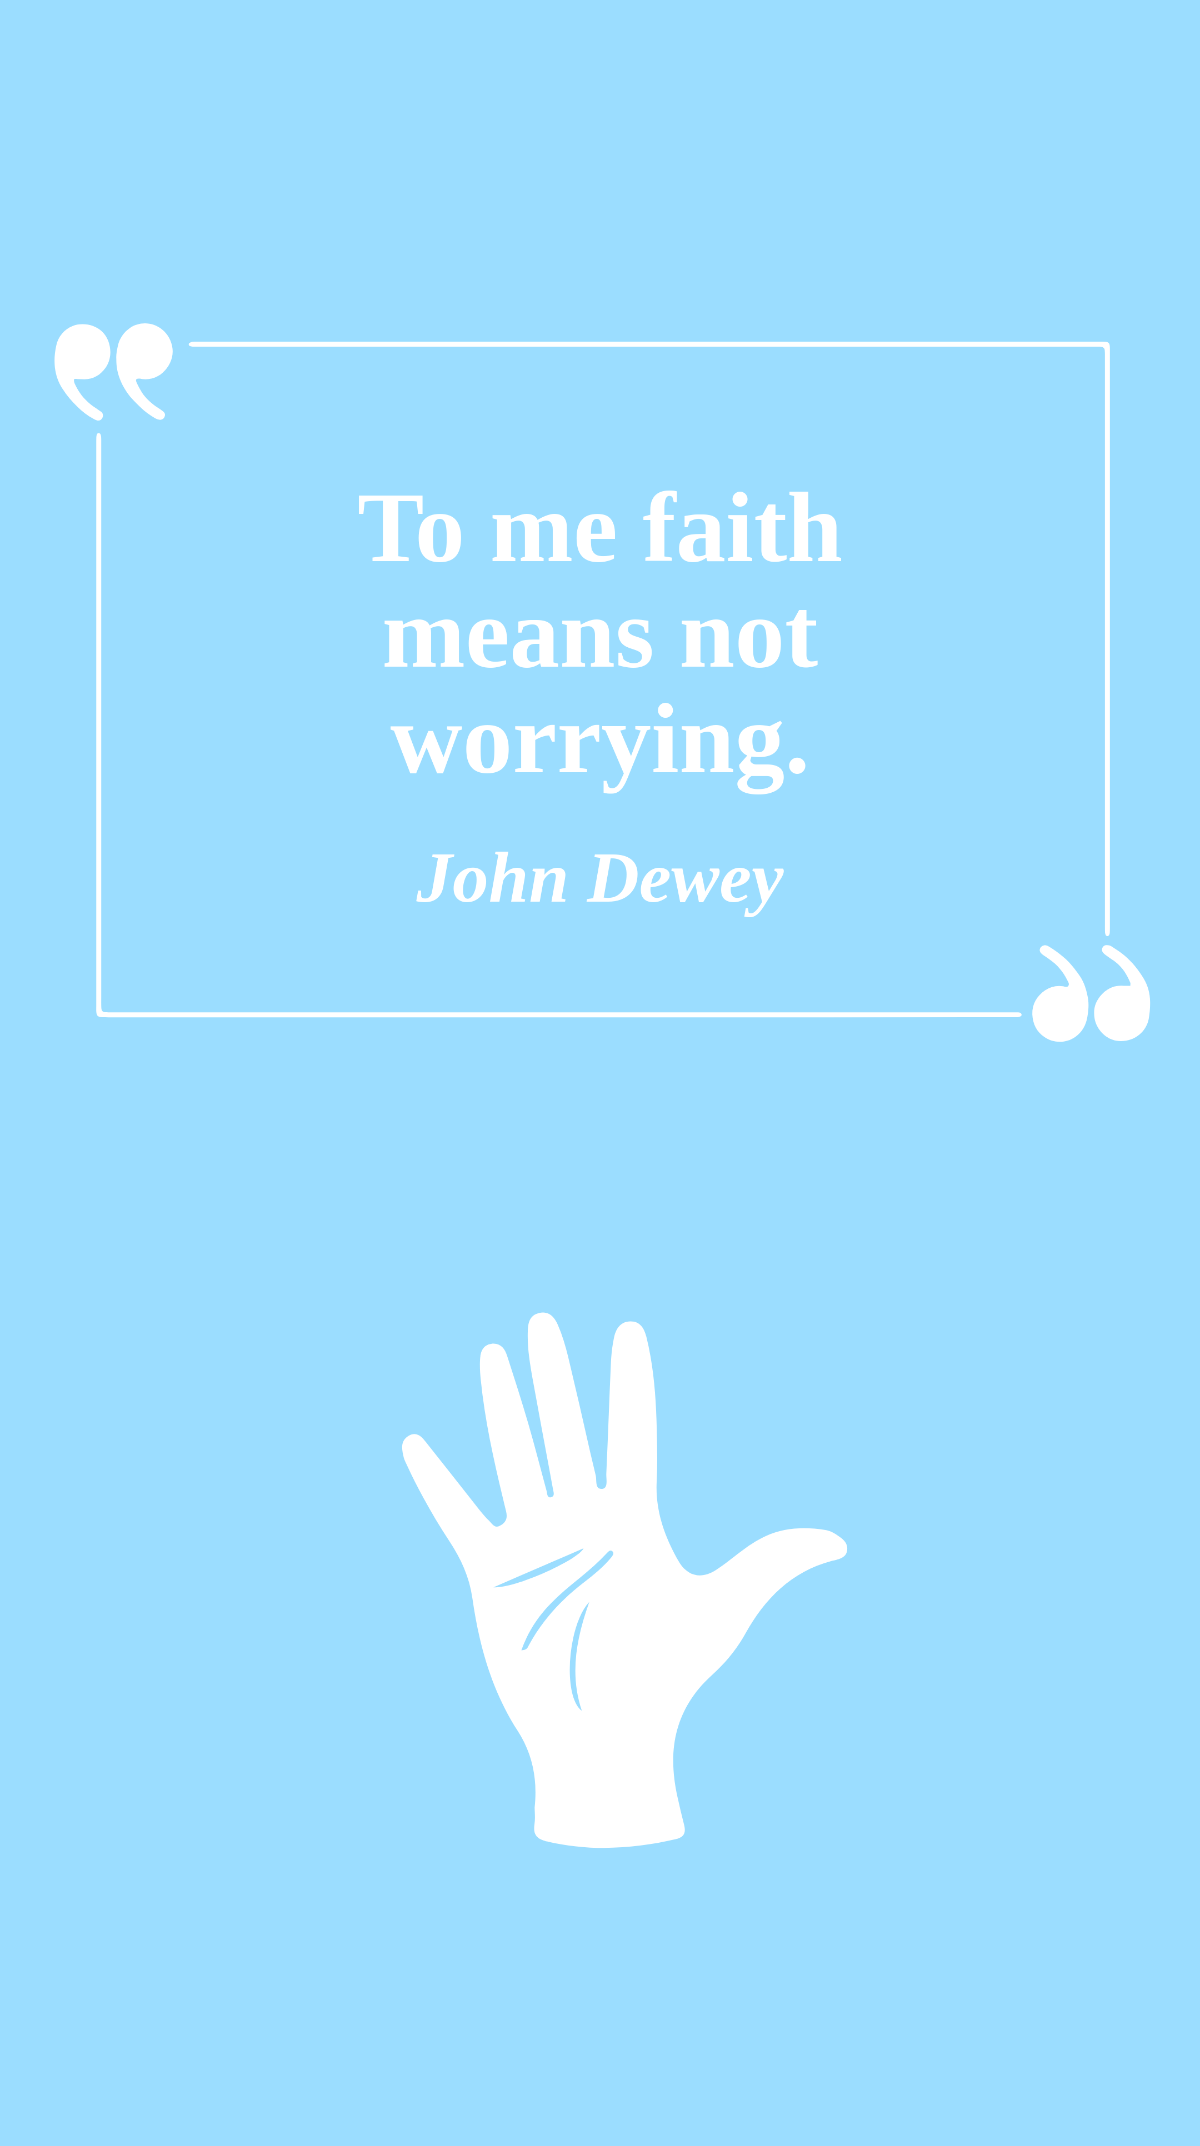 John Dewey - To me faith means not worrying.